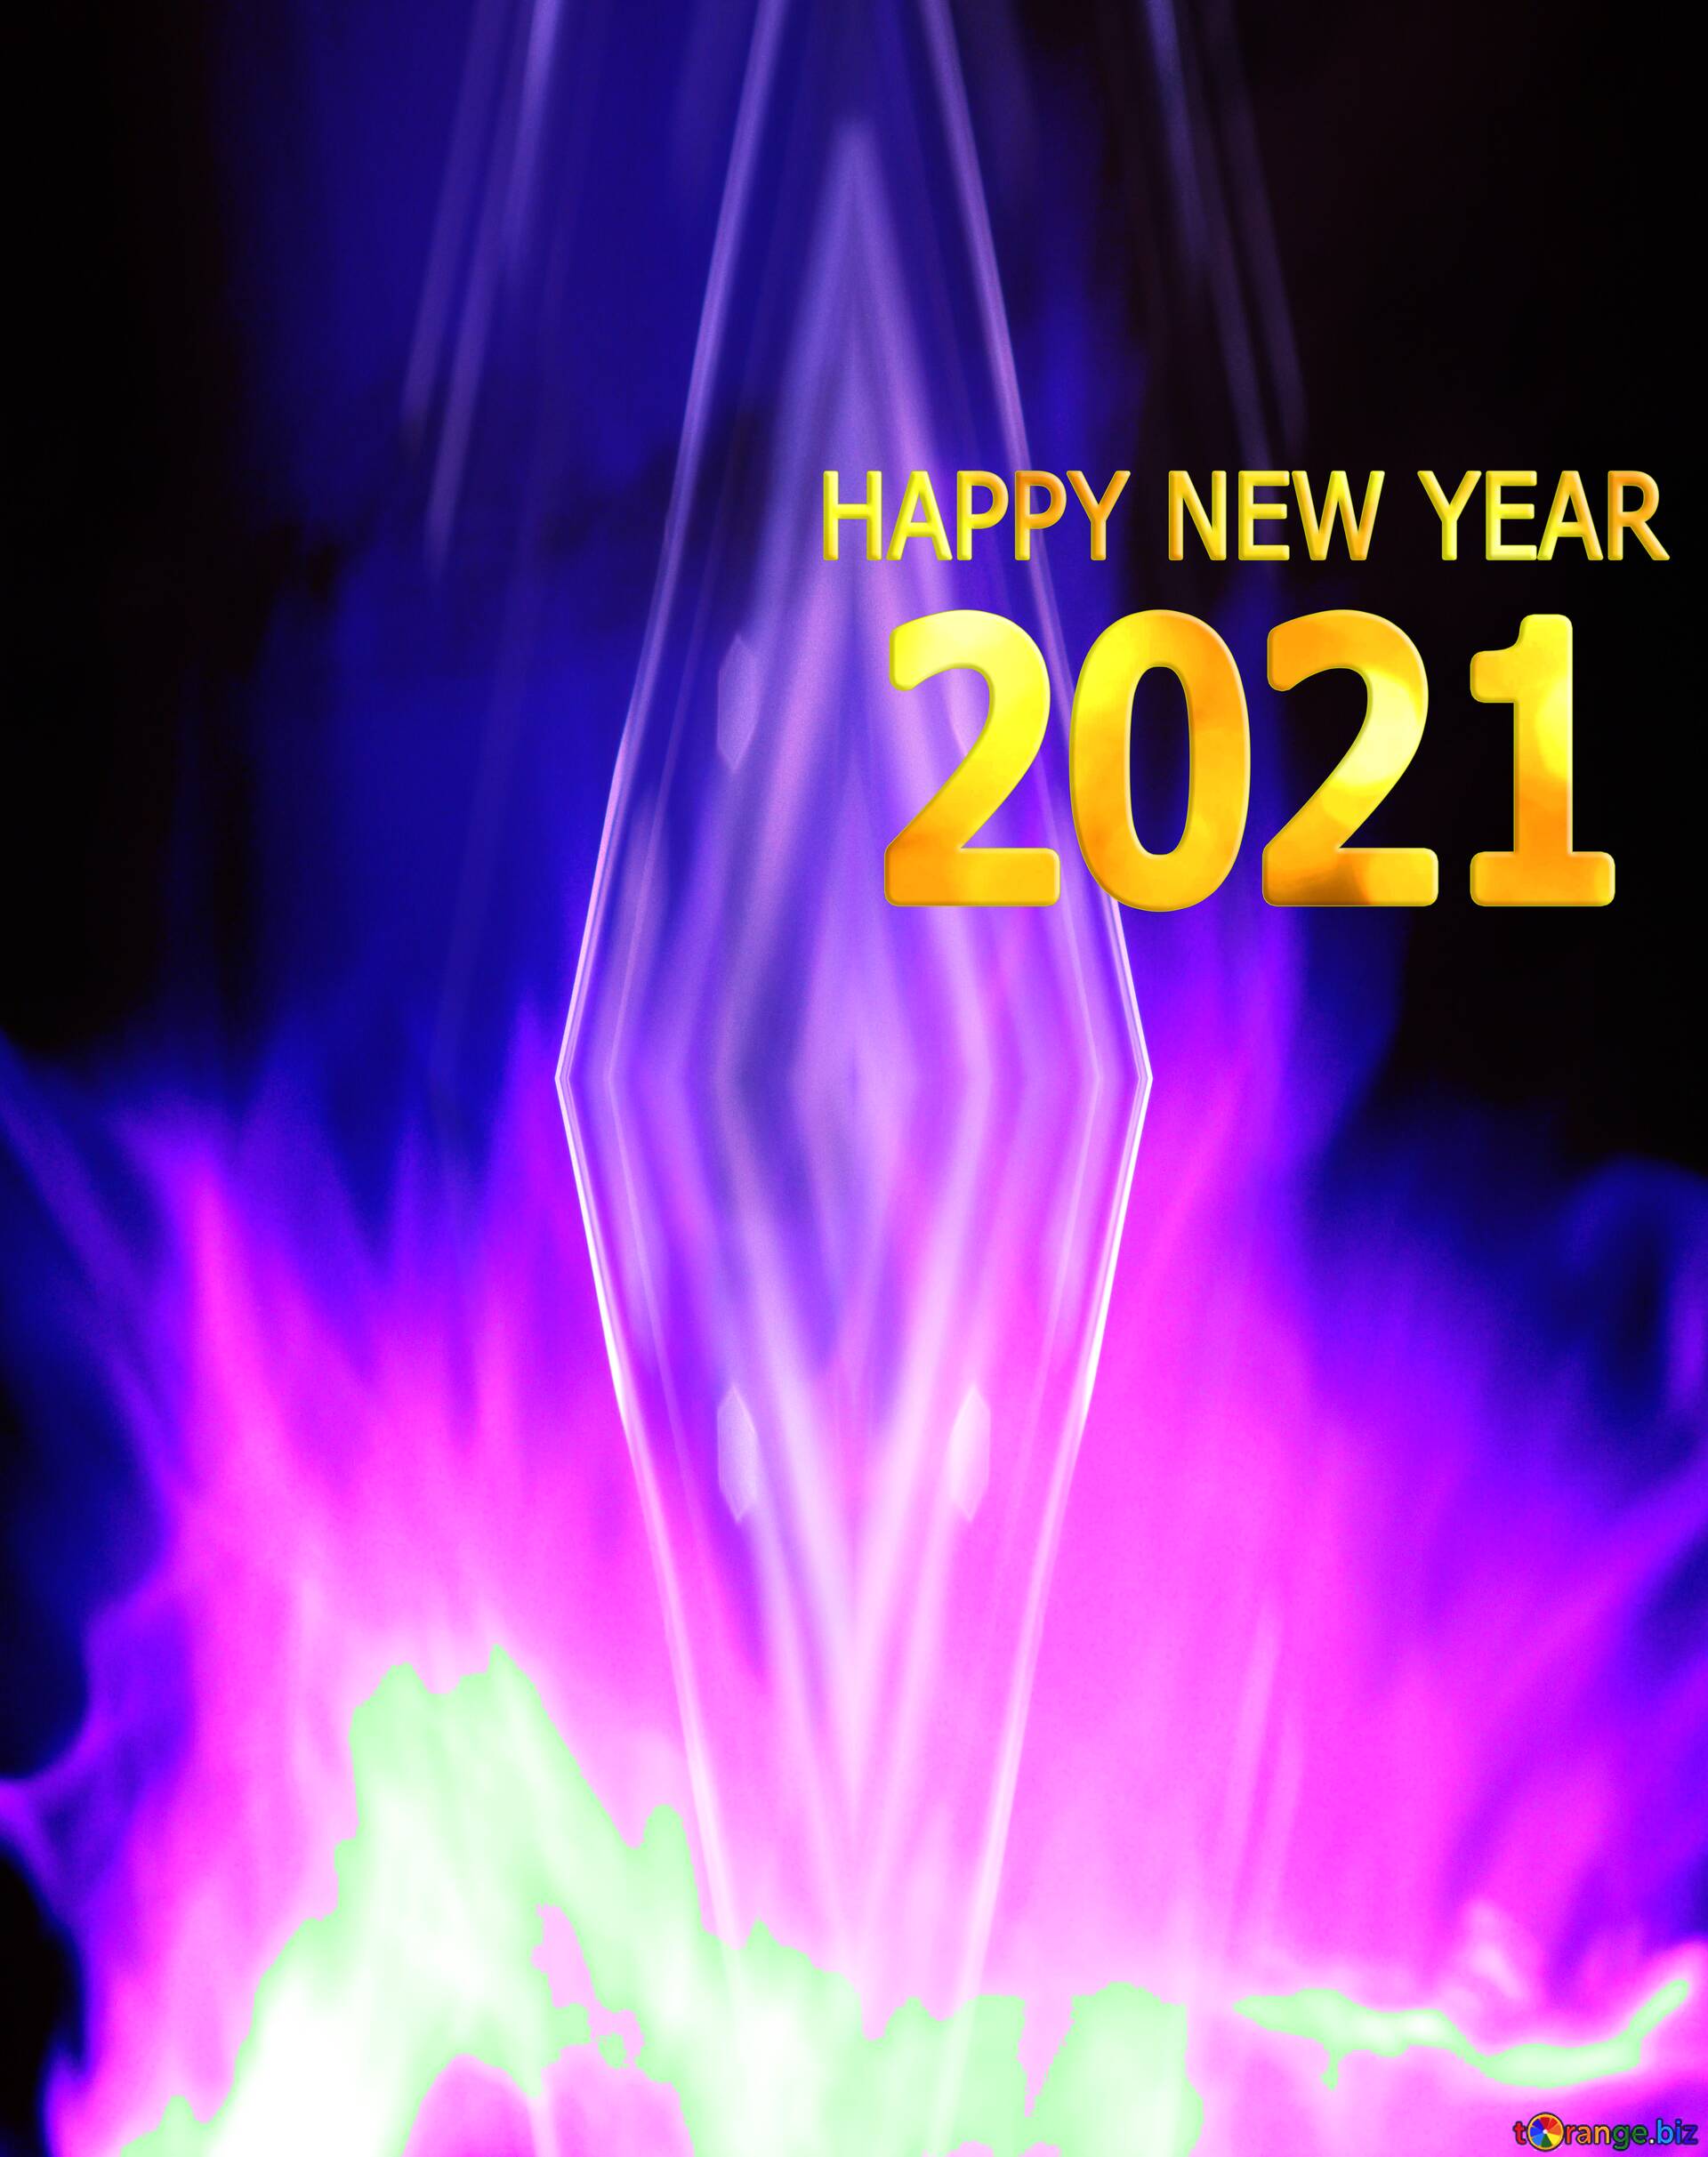 Download Free Picture Happy New Year 2021 Art Abstract Background On CC BY License Free Image Stock TOrange.biz Fx №209636